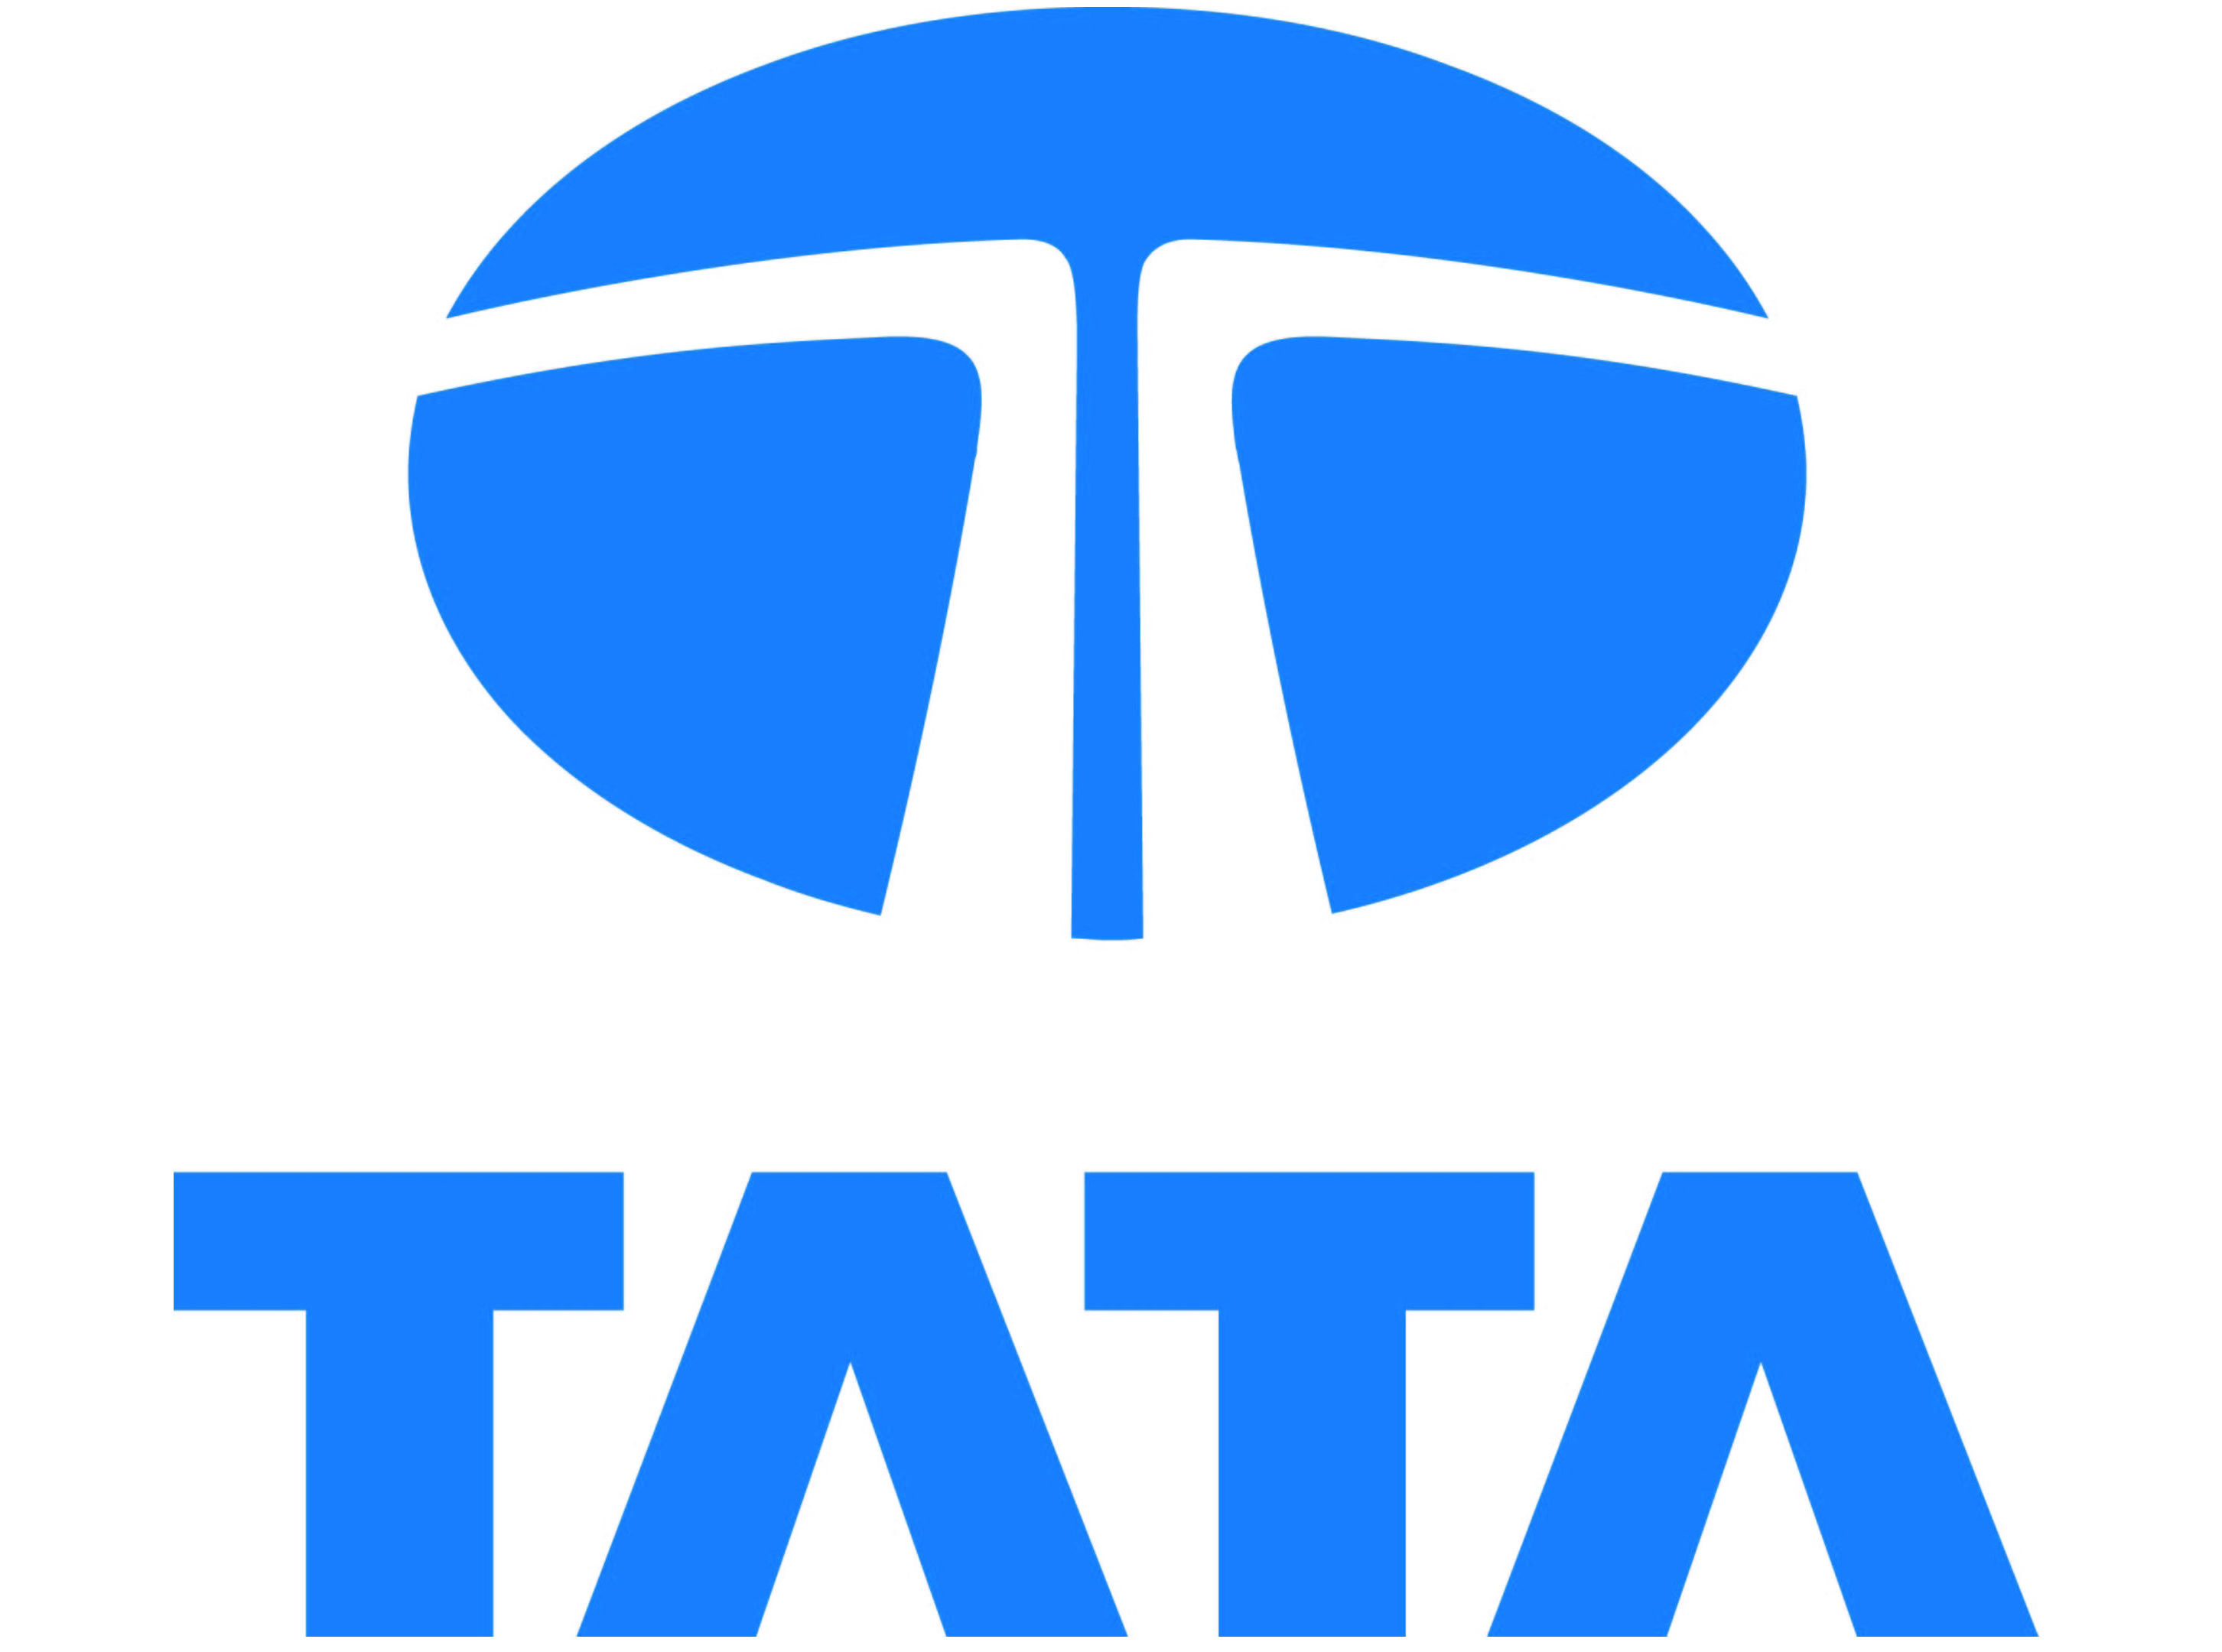 Tata is a direct competitor to IndyCar's NTT Data